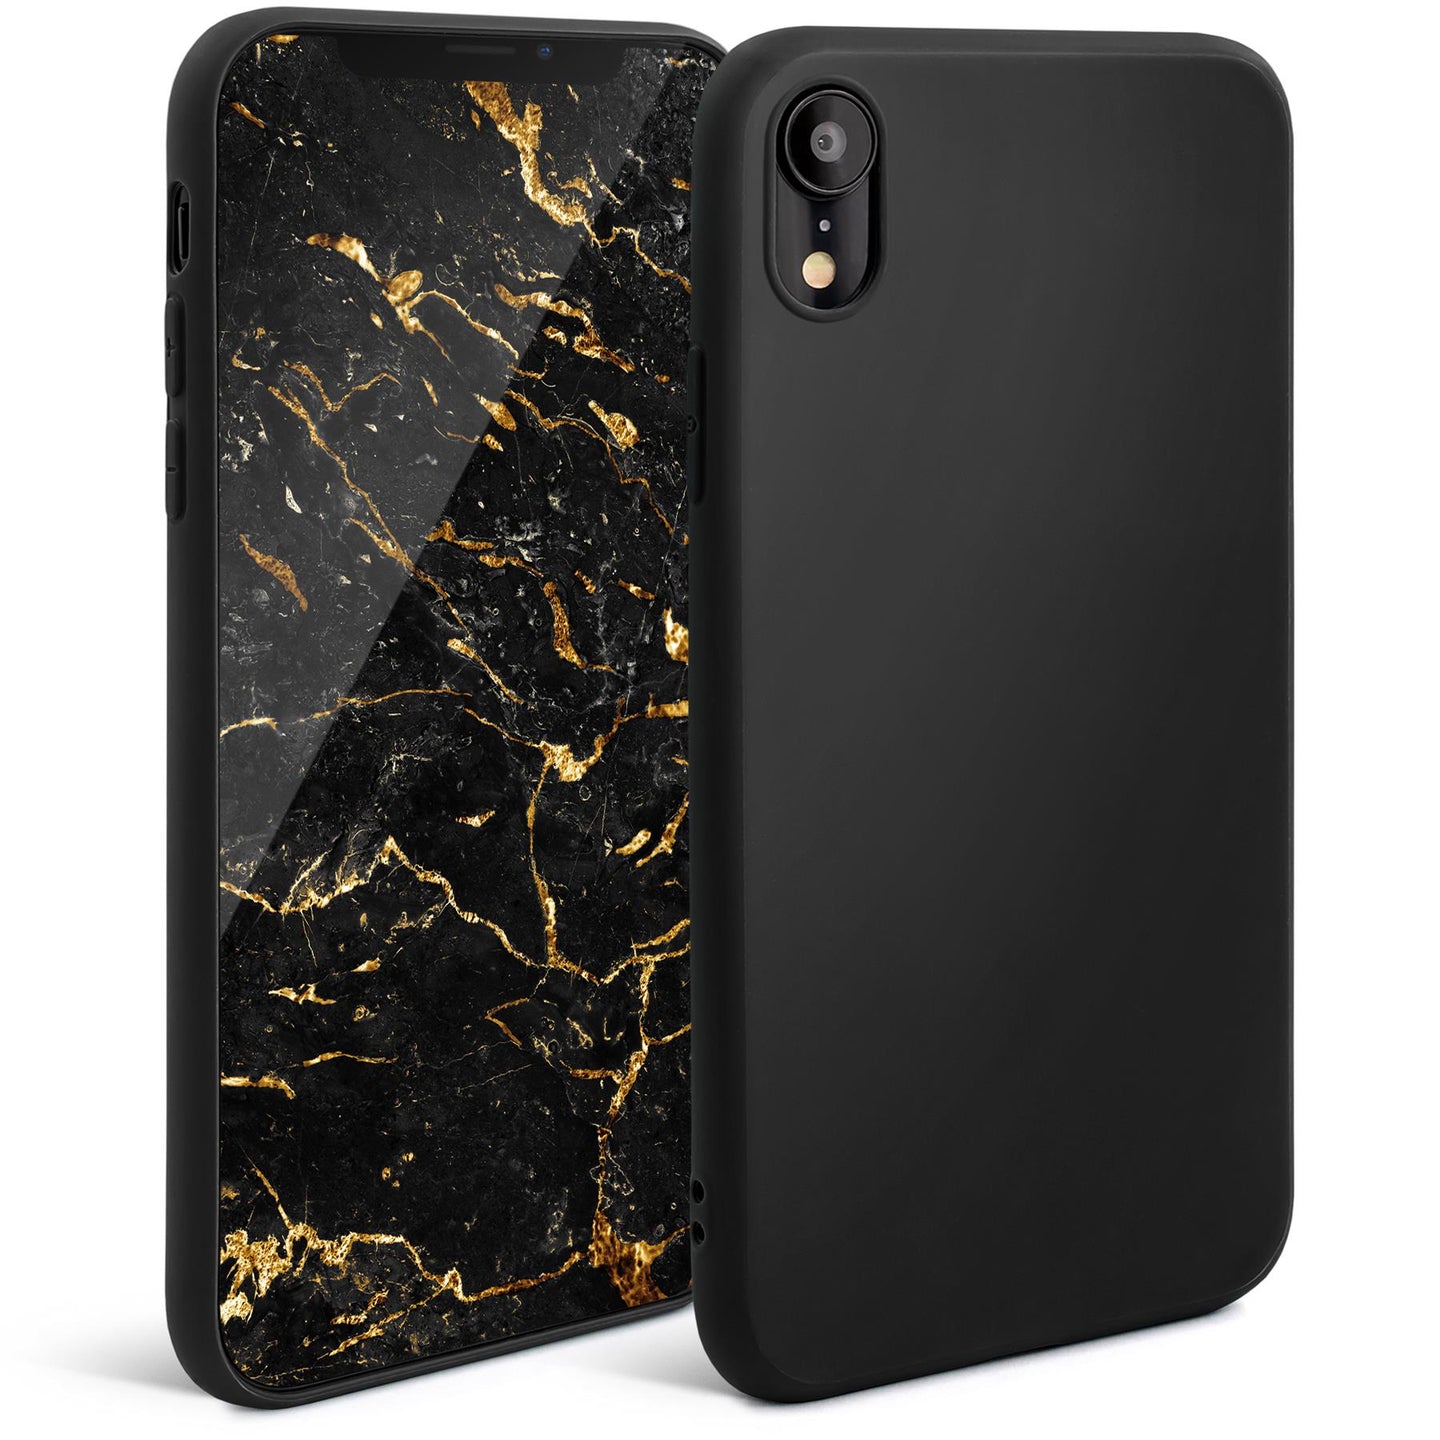 Moozy Minimalist Series Silicone Case for iPhone XR, Black - Matte Finish Slim Soft TPU Cover